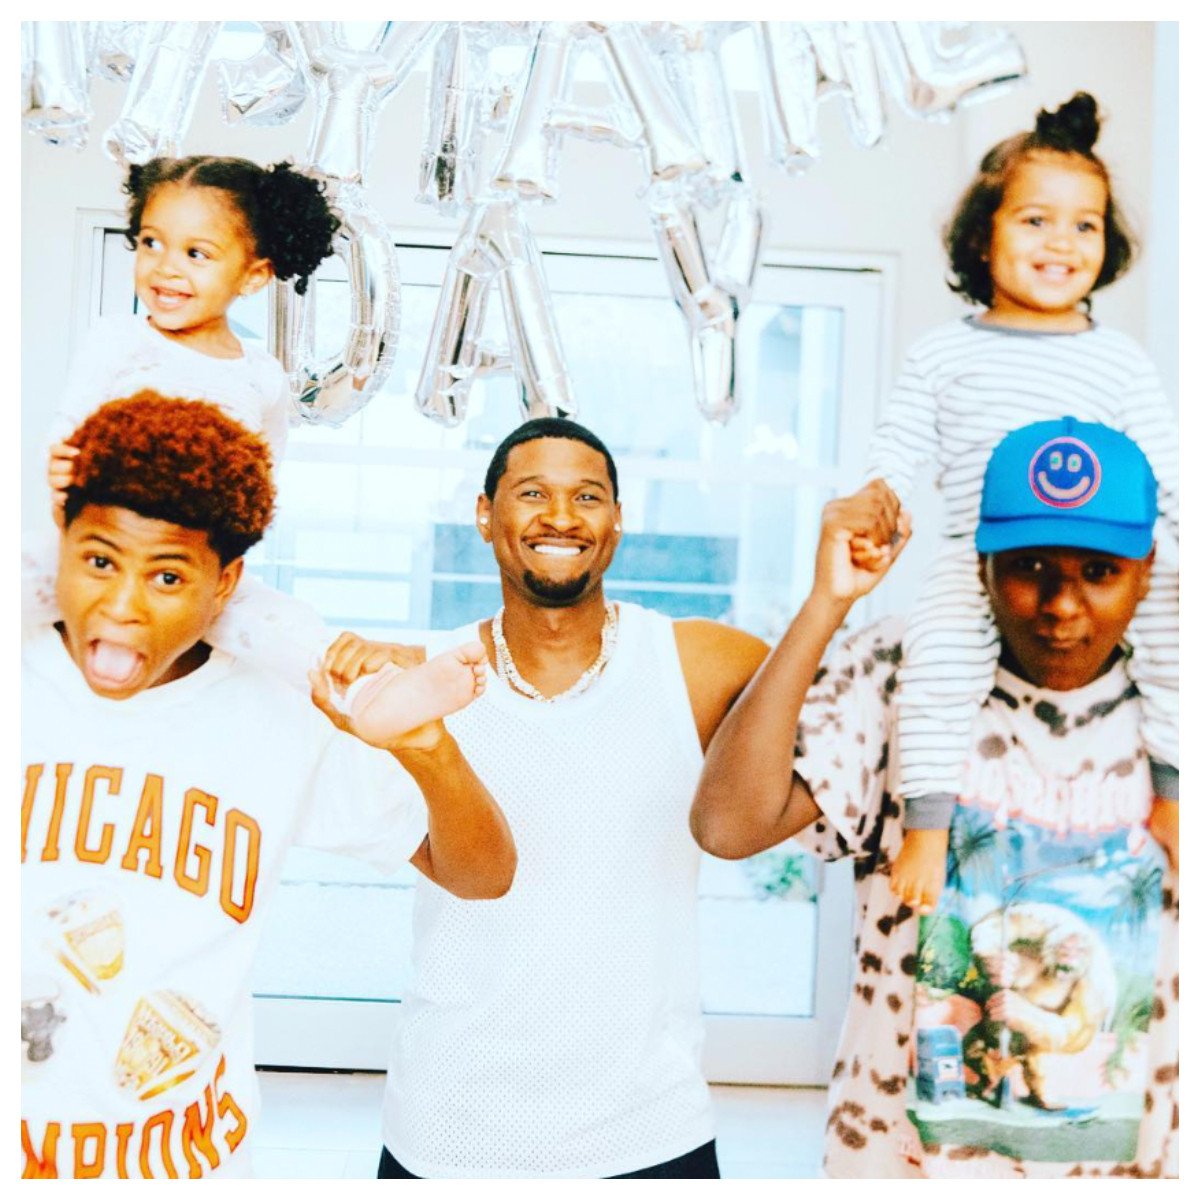 Who is Super Bowl halftime show performer Usher’s family? Photo: @usher/Instagram